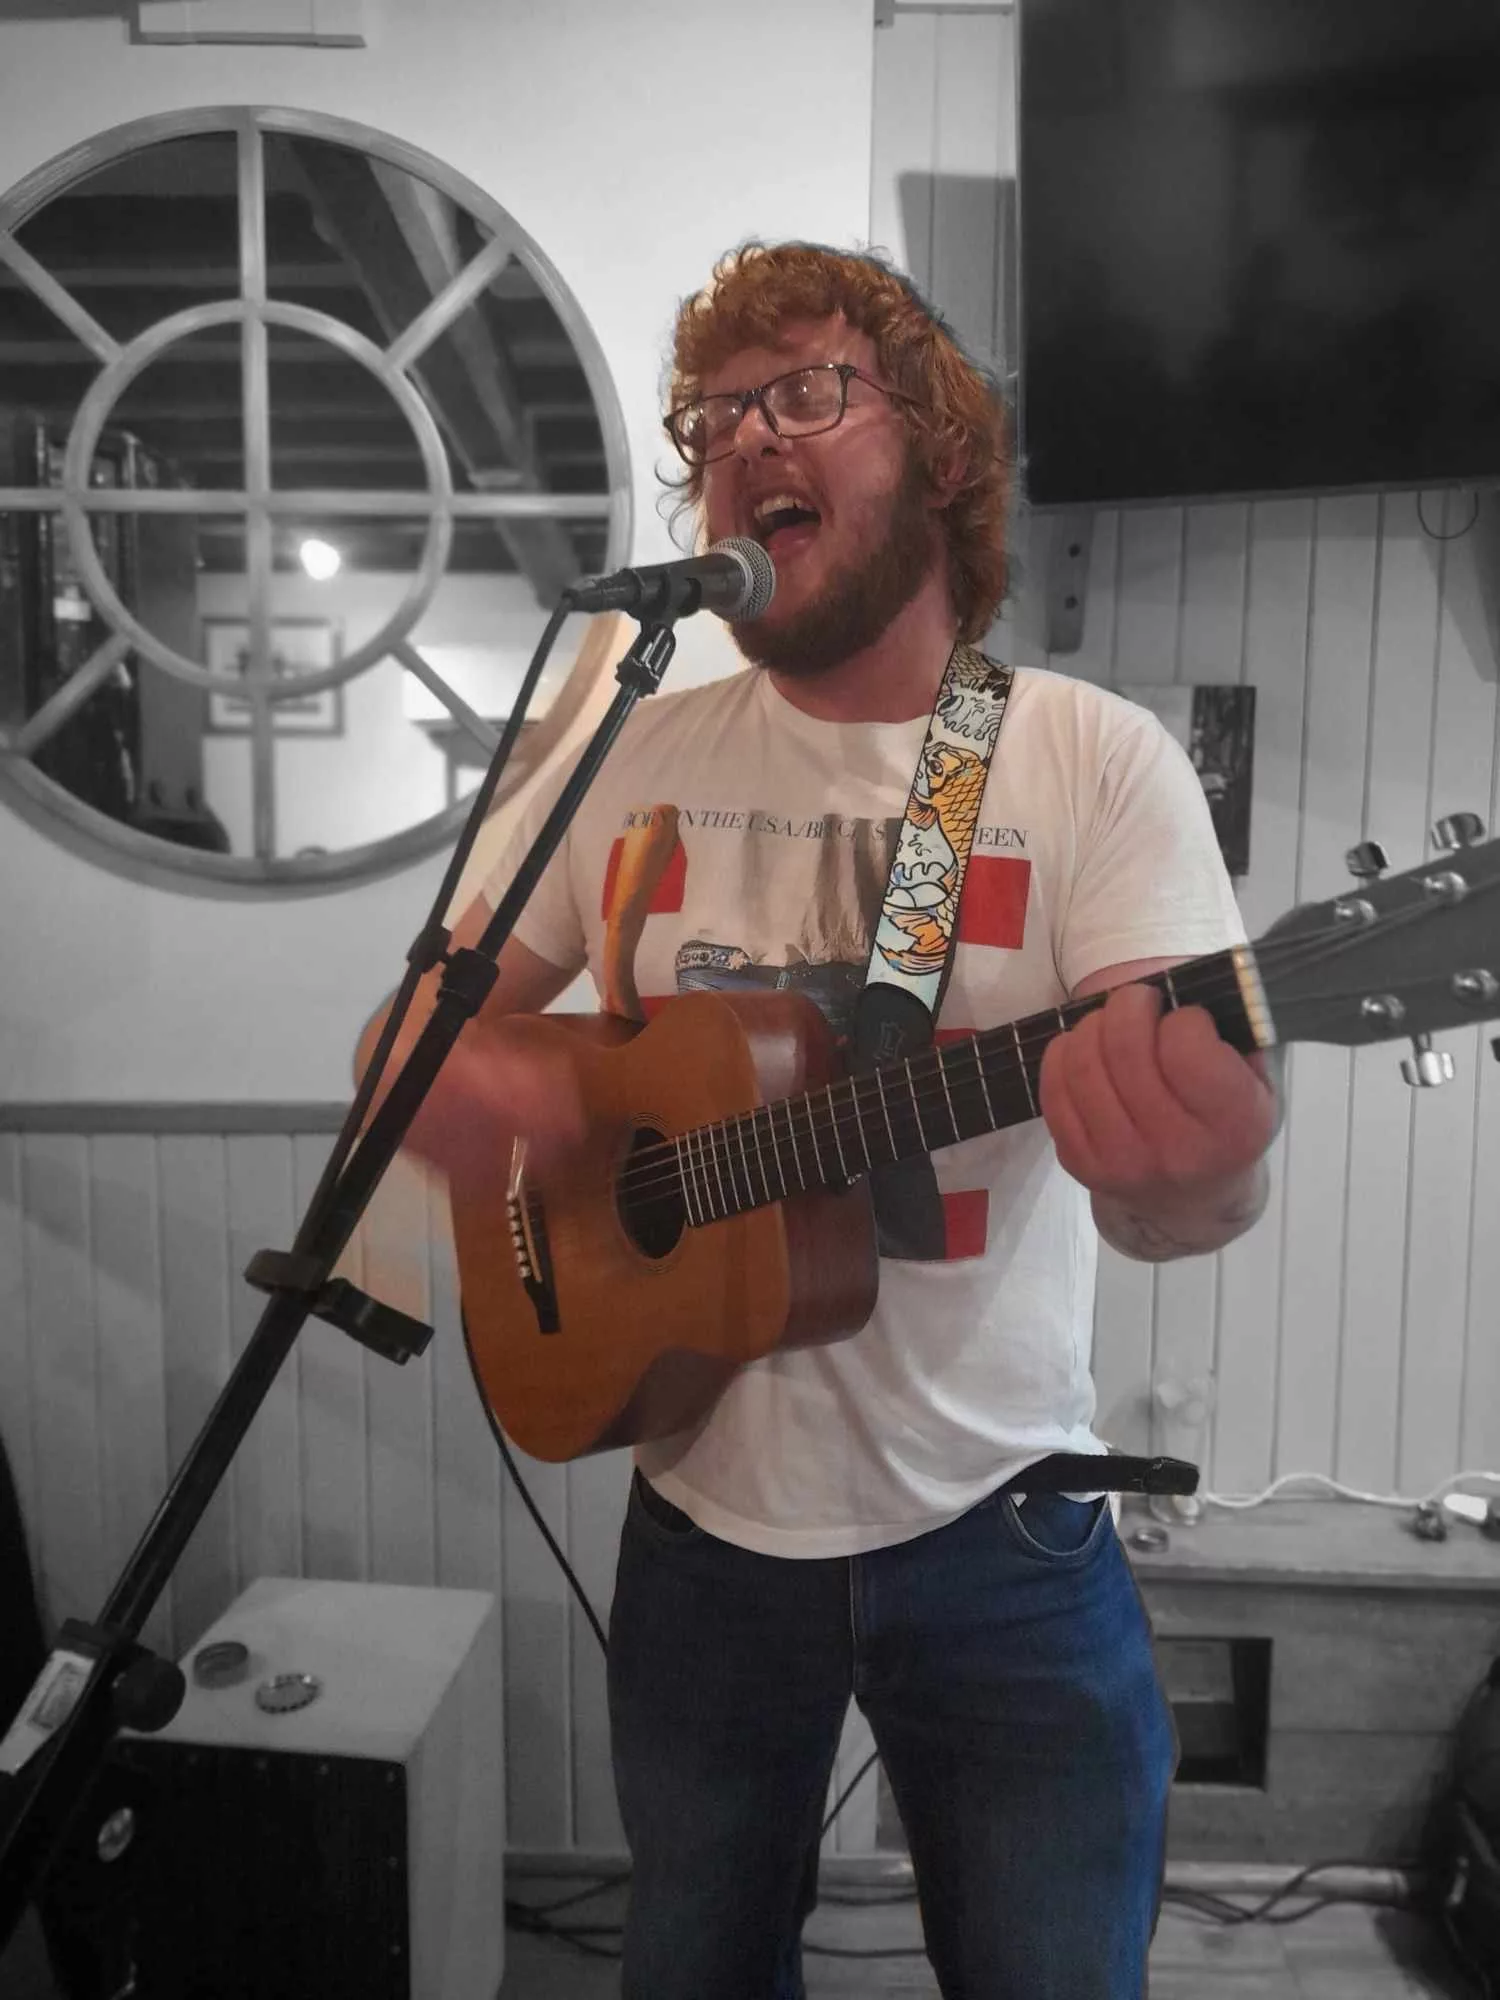 James Devine. Malvern Rocks Gig Guide for Music in Malvern. Gigs, concerts, live music, open mic nights. Make Malvern your destination for music.